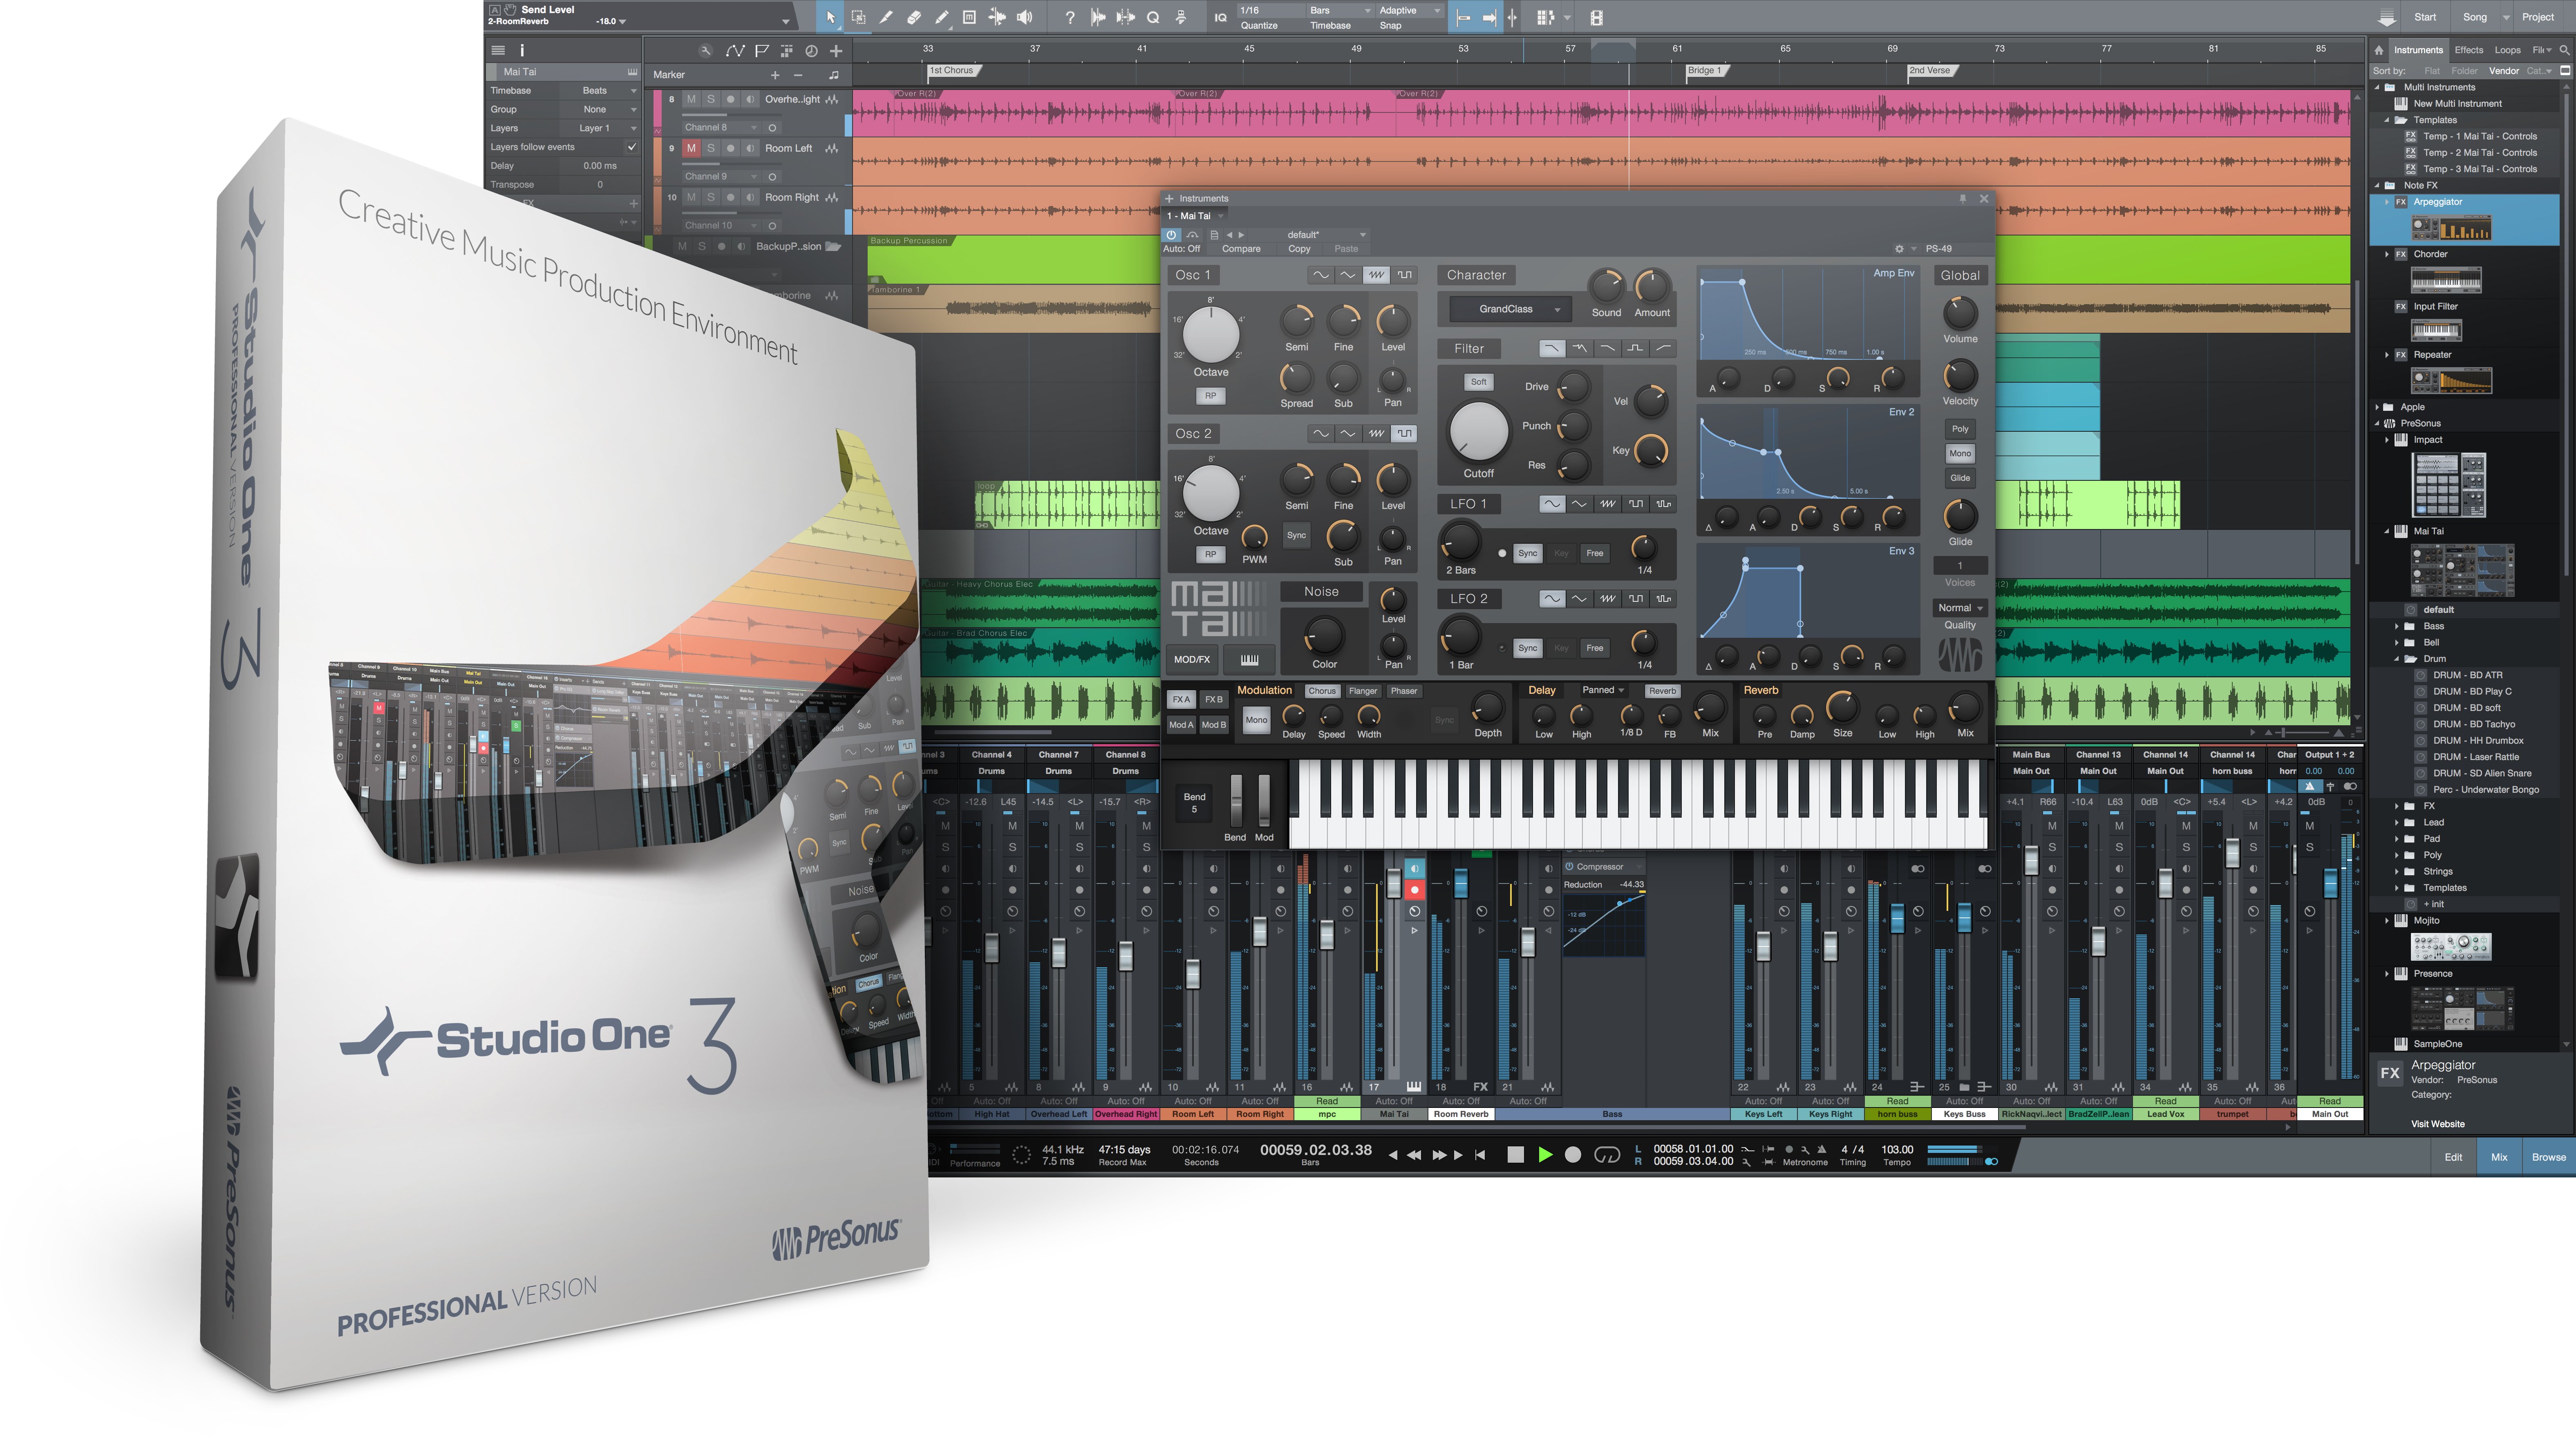 Watch the Studio One 3 Launch Webcasts From PreSonus